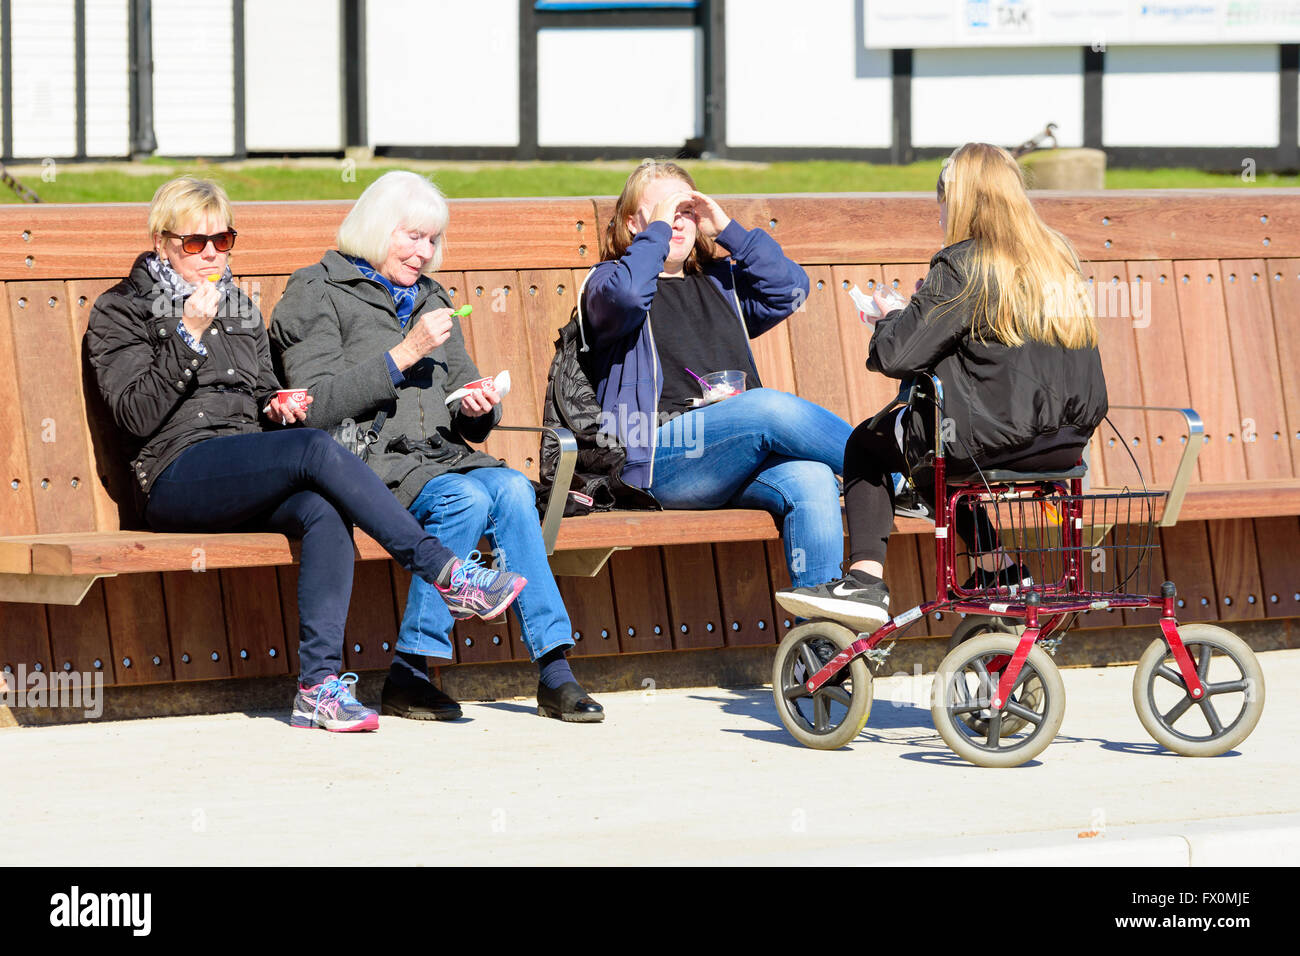 Simrishamn, Sweden - April 1, 2016: Four persons of different age are seated together eating ice cream in the sunshine. One sit Stock Photo